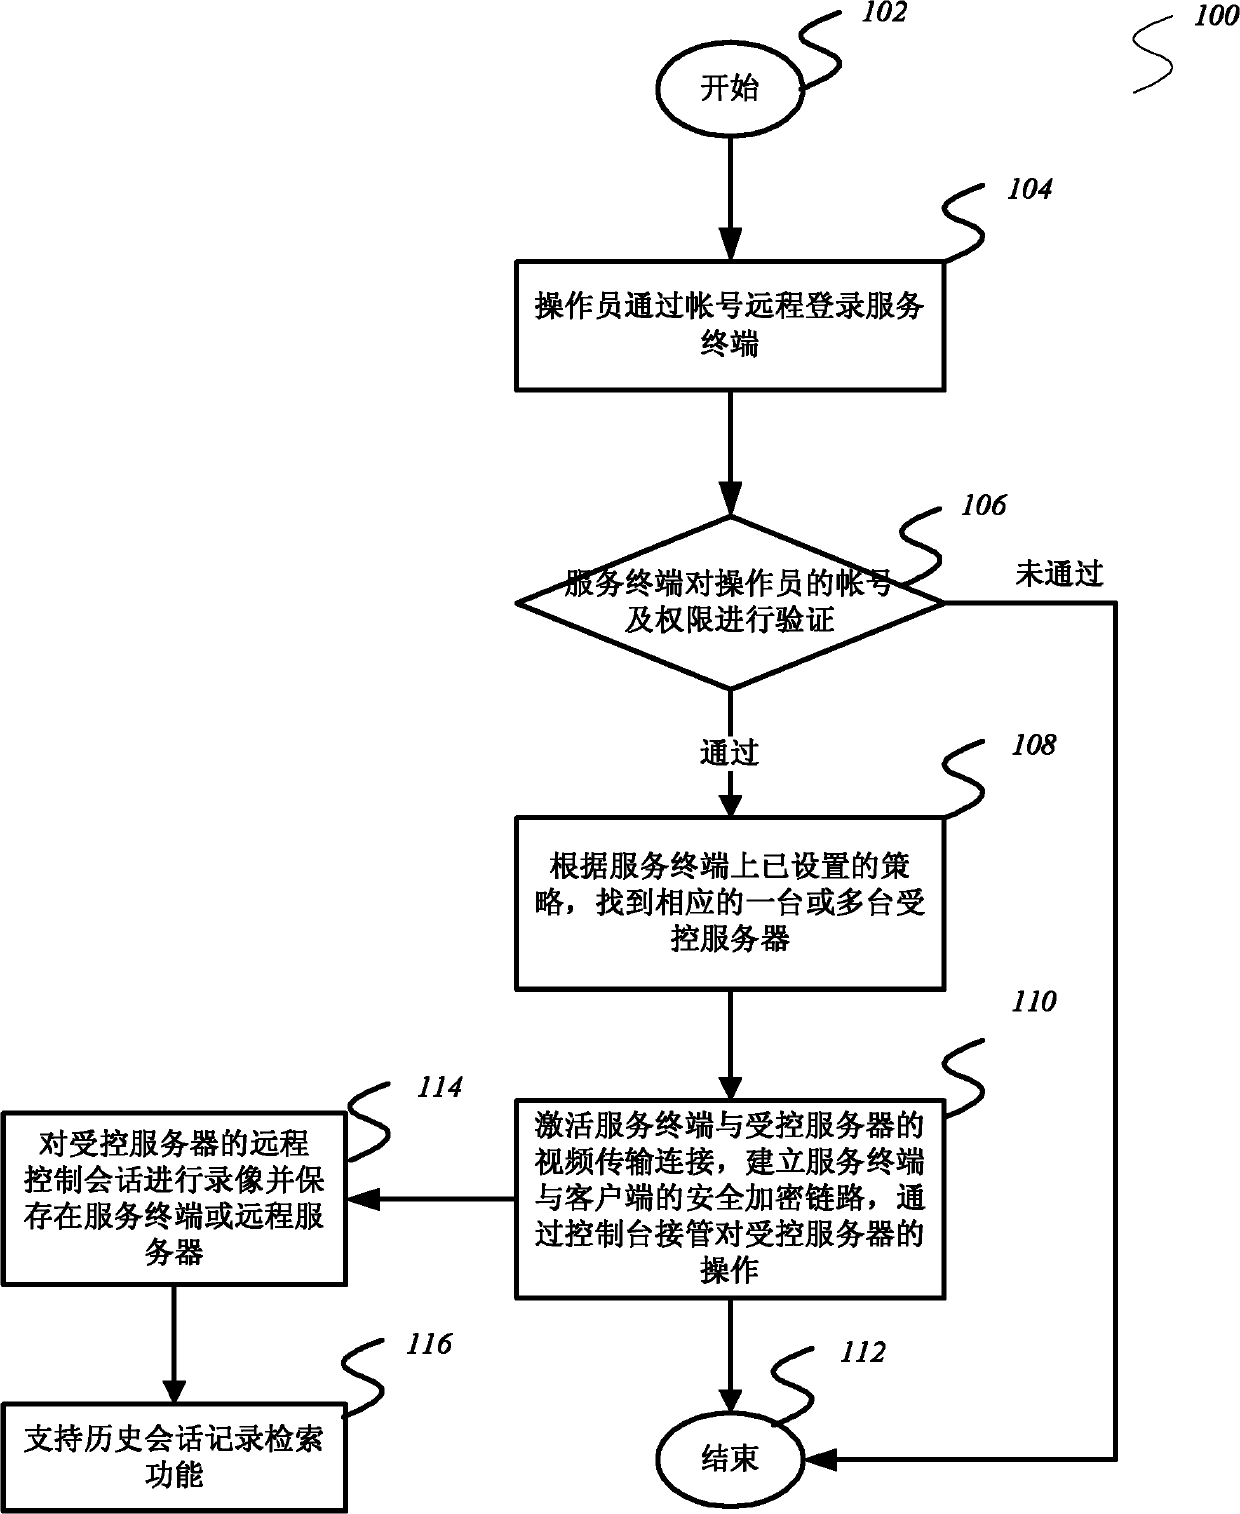 Method and system for realizing security audit function in remote control process